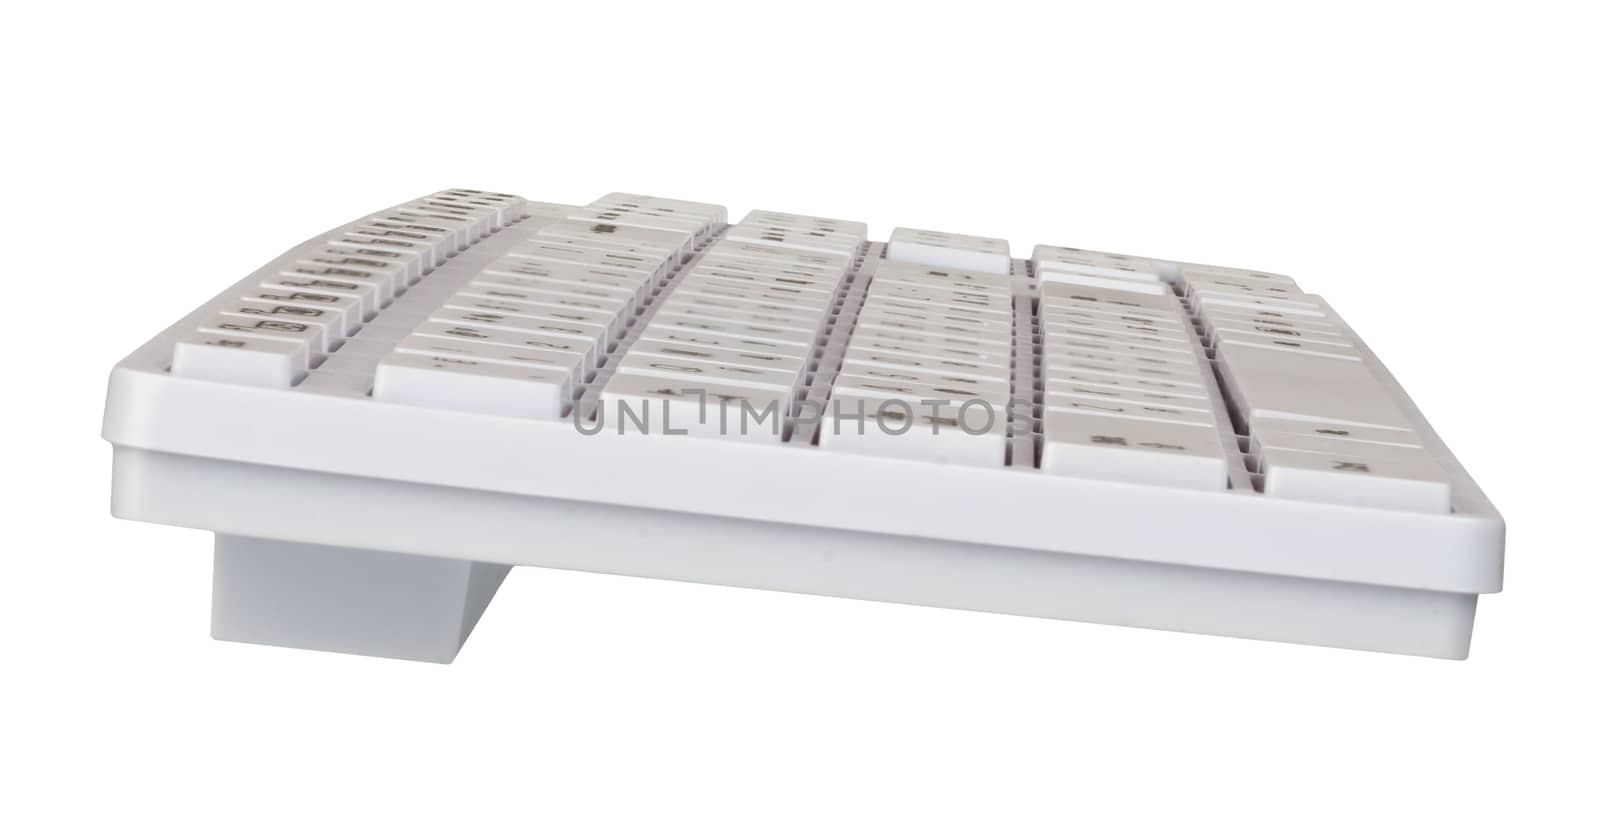 Keyboard on isolated white background, side view